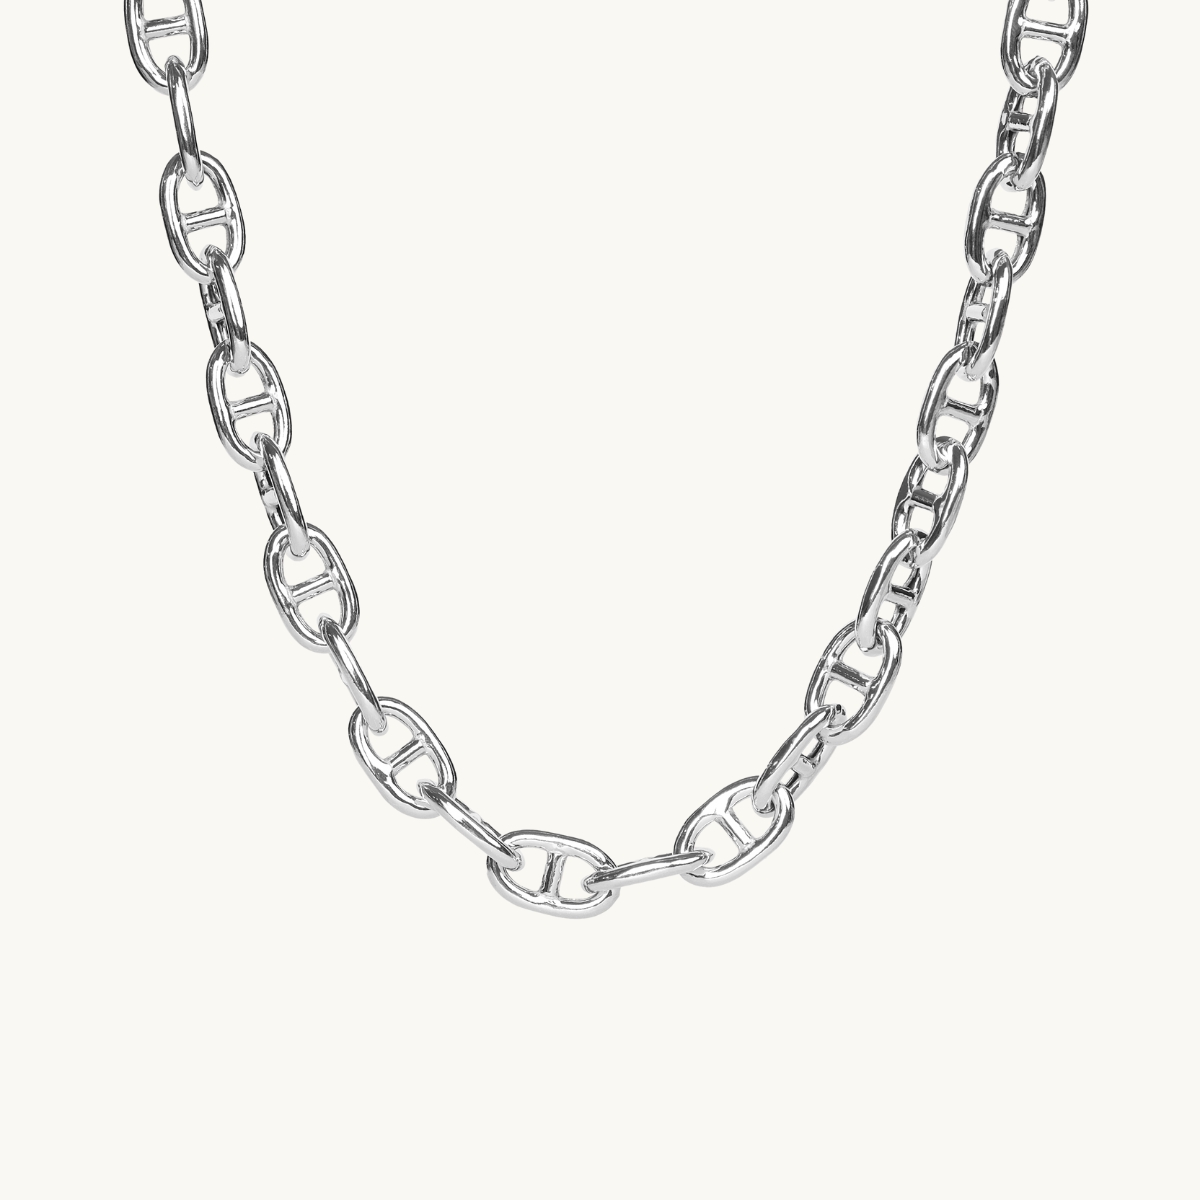 Anchor chunky chain necklace in silver